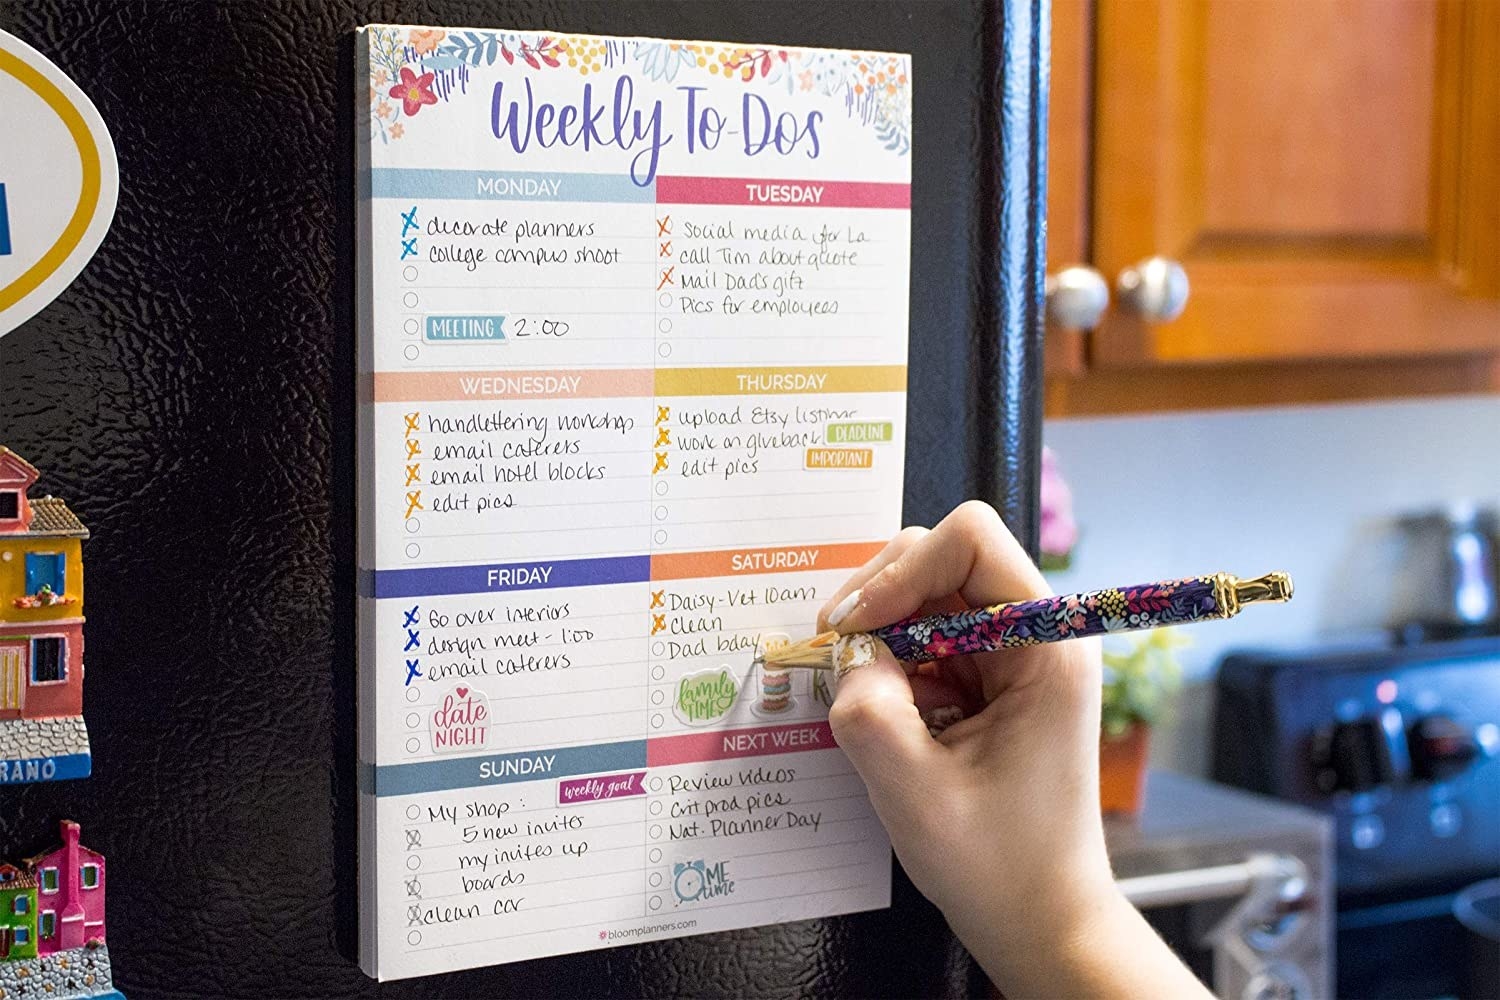 Model writing on weekly to do bad hanging on refrigerator 